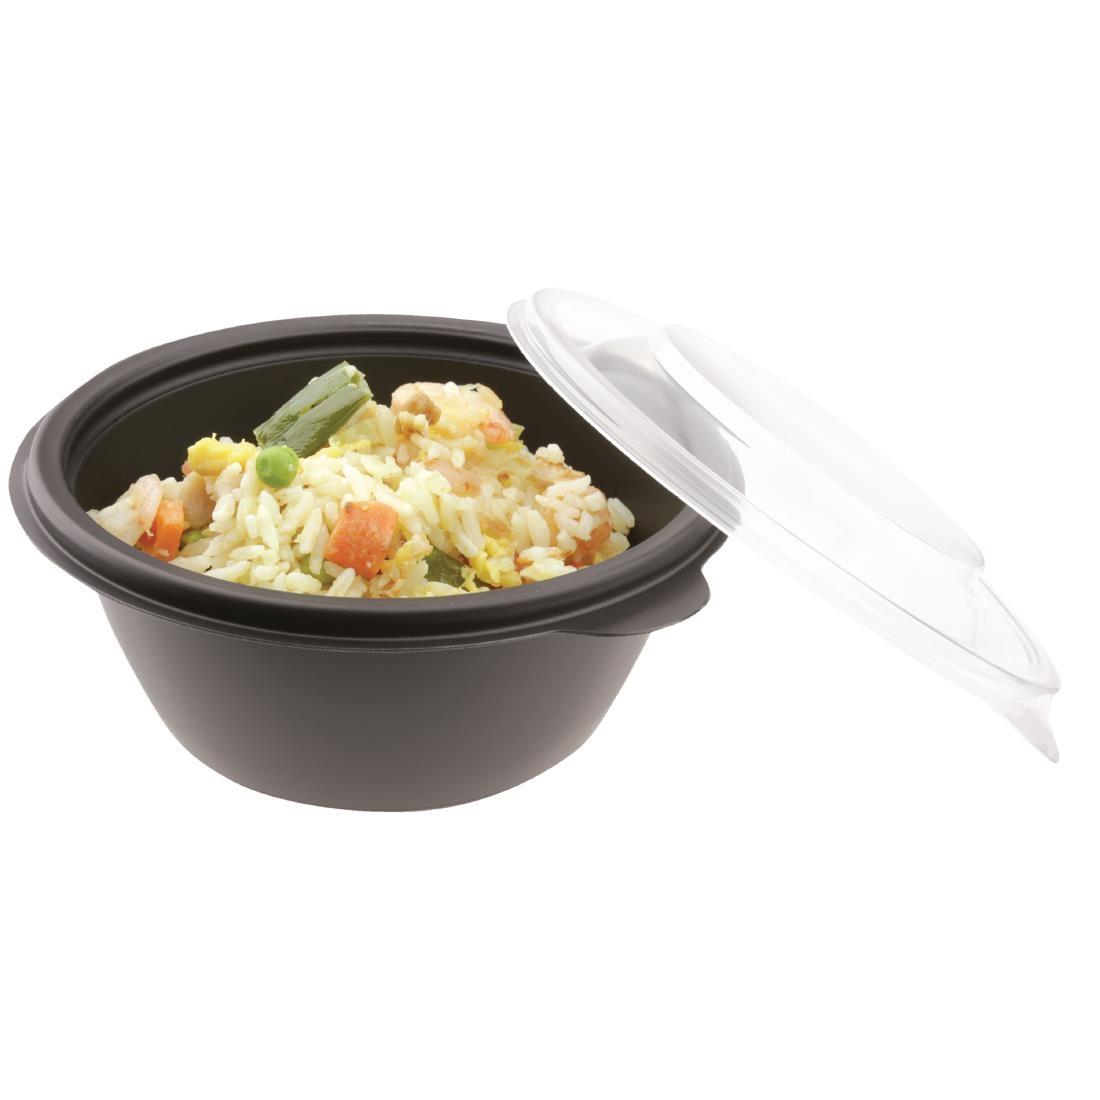 Fastpac Small Round Food Containers 375ml / 13oz (Pack of 500) - DW788  - 3